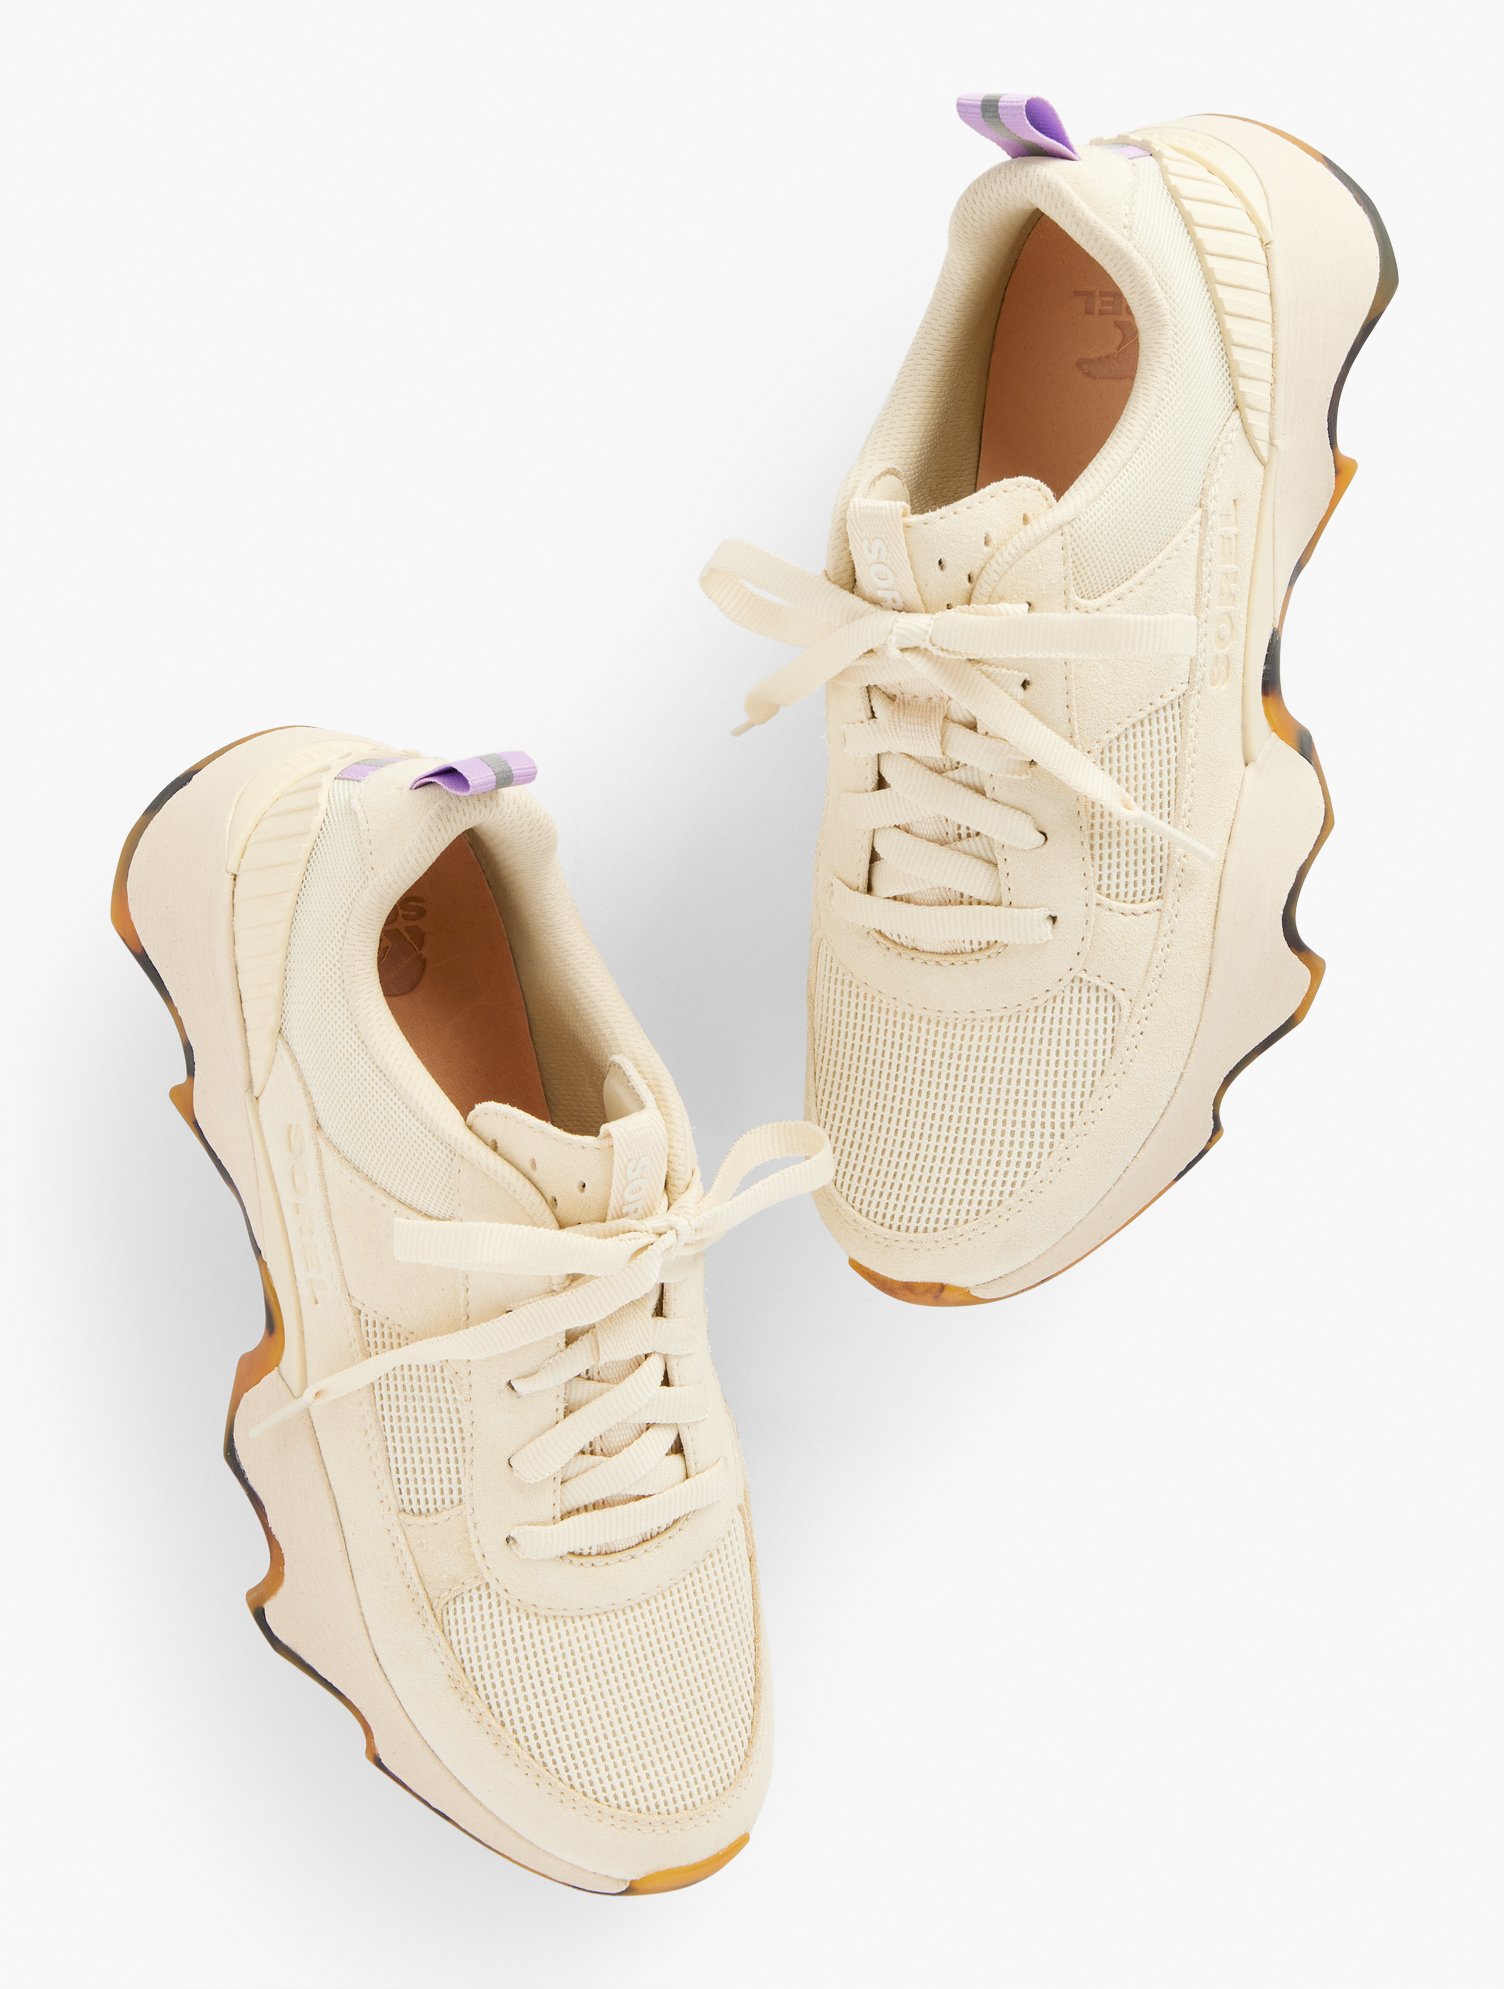 Talbots Kinetic™ Impact Ii Lace Up Sneakers - Honey White/lilac - 9 1/2 M  In Honey White,lilac